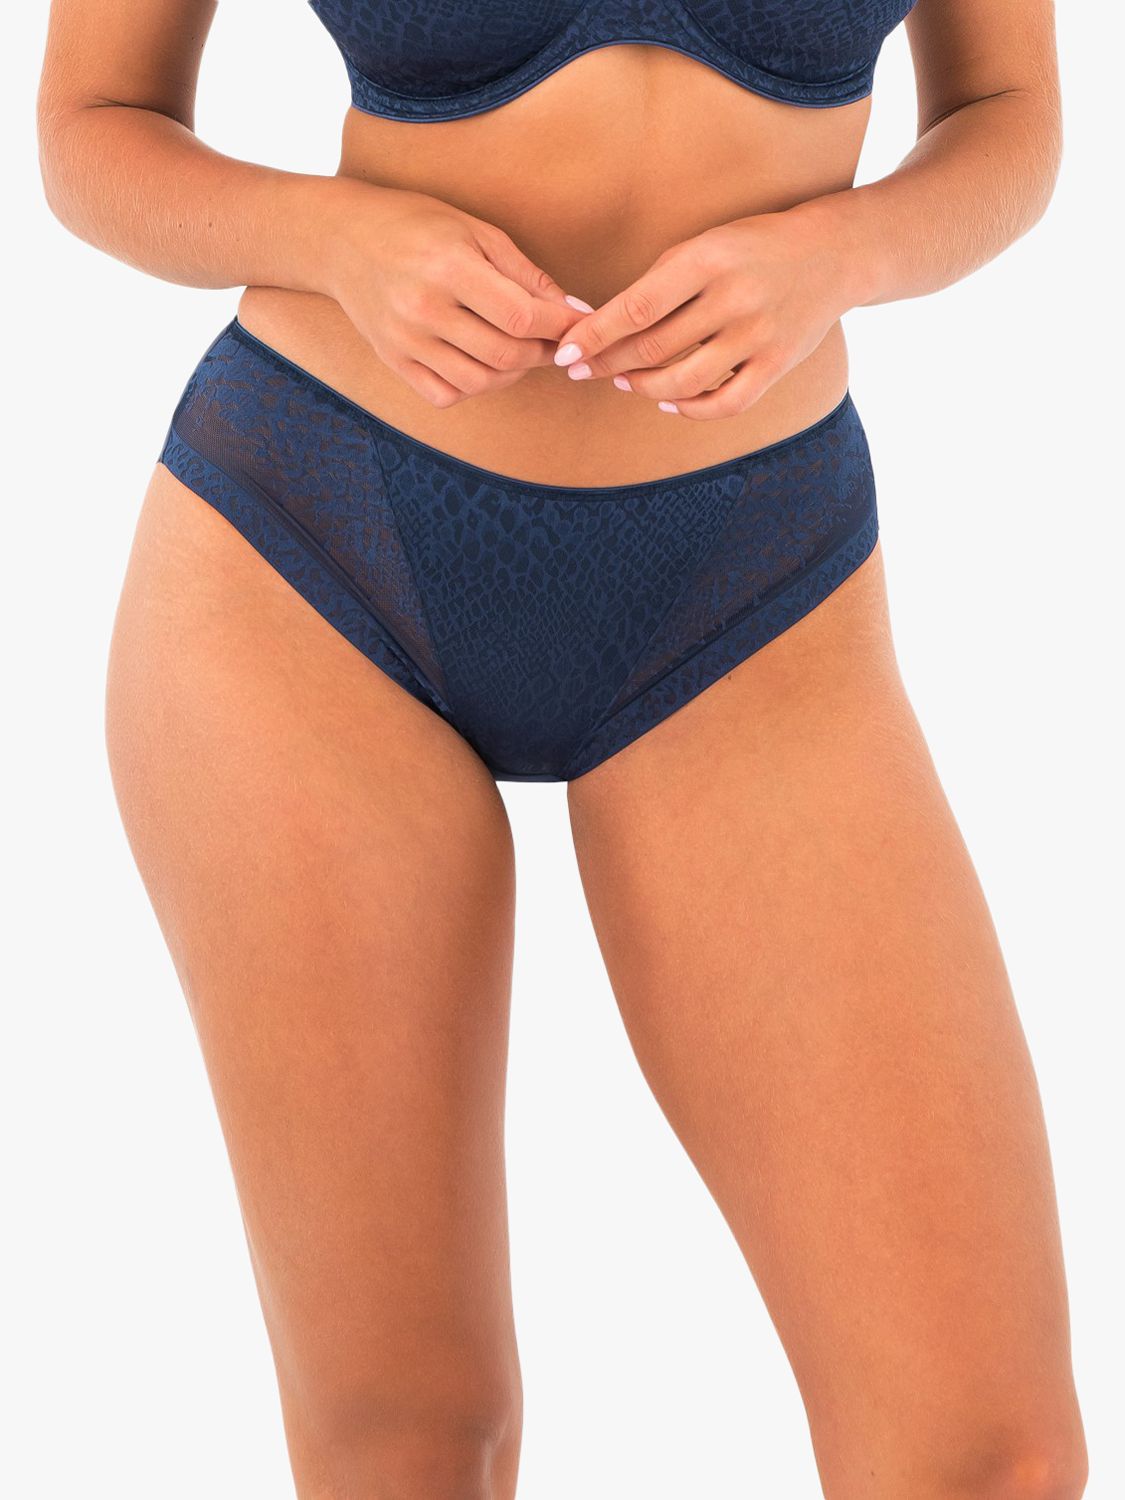 Lace full knickers navy blue La Redoute Collections Plus